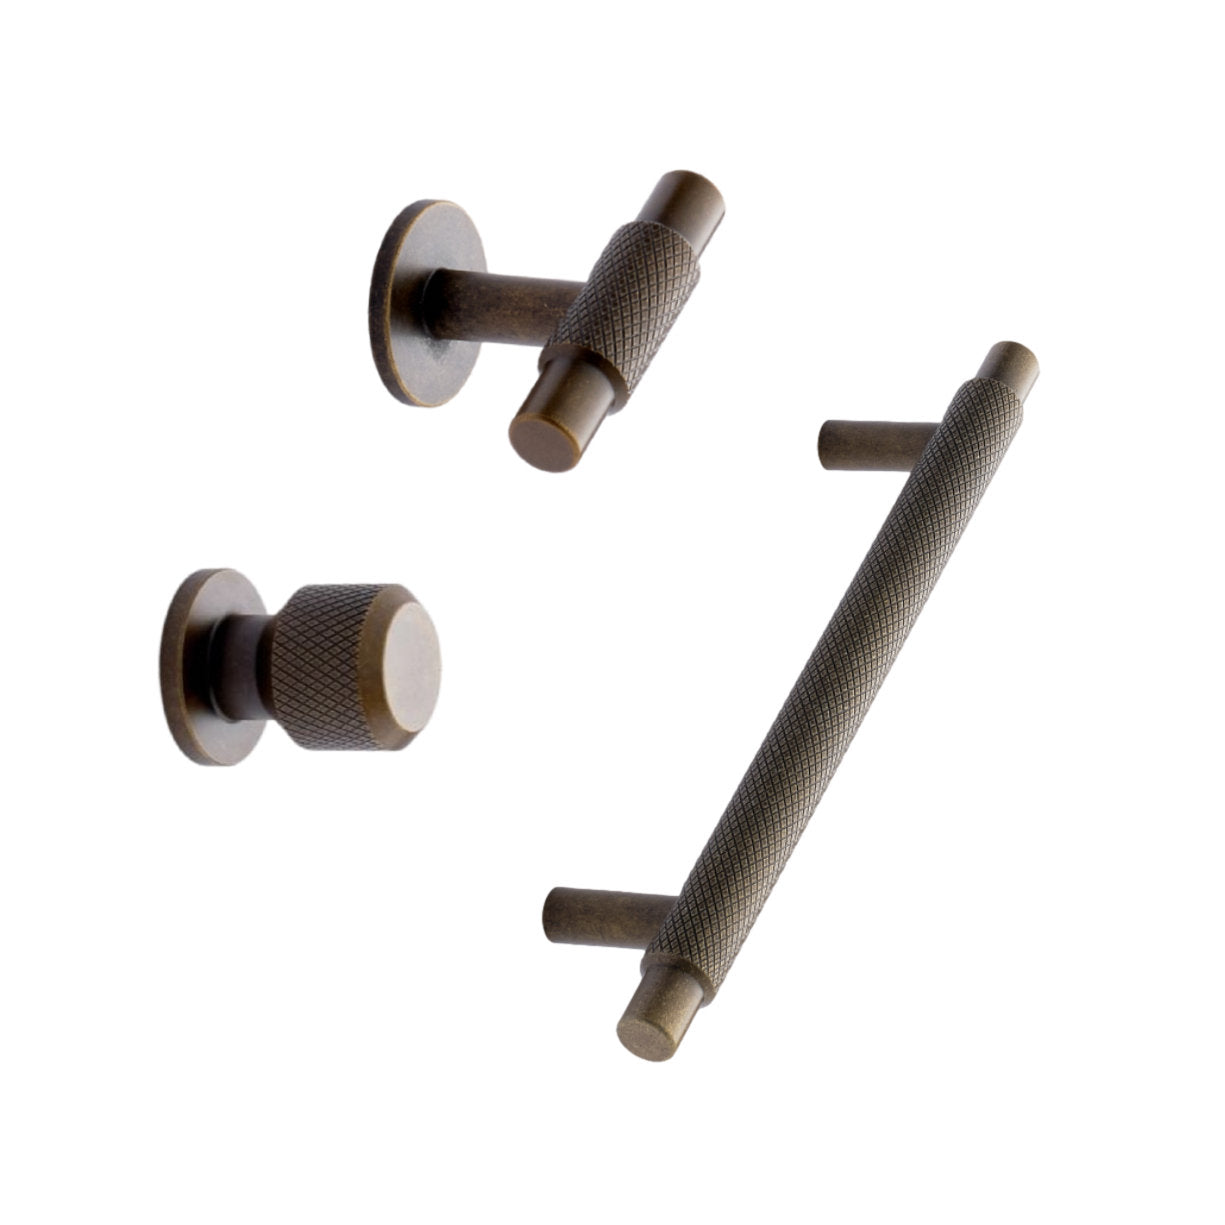 Antique Bronze "Manor" Knurled Cabinet Knobs and Drawer Pulls - Forge Hardware Studio